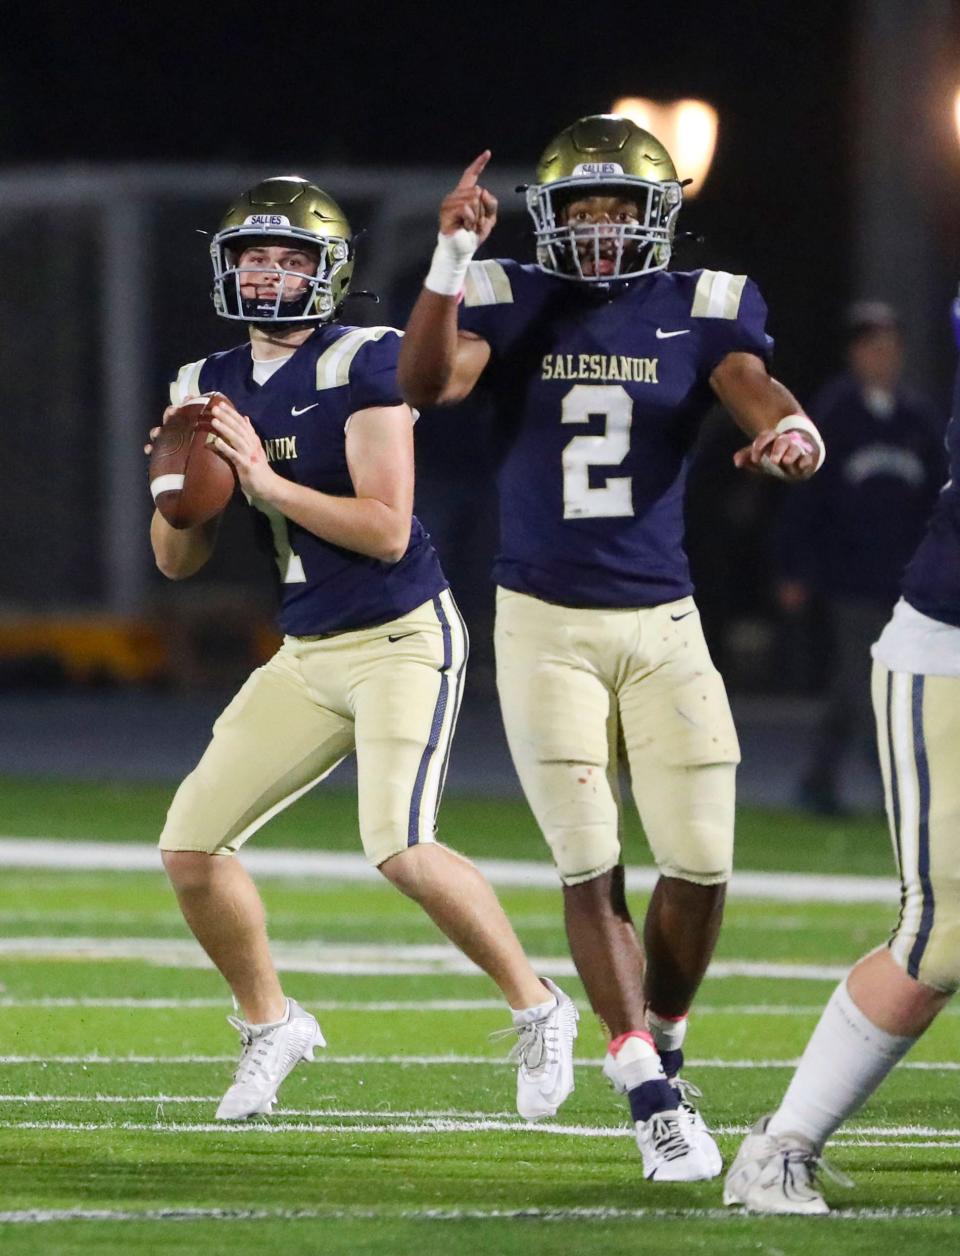 Salesianum quarterback Ryan Stoehr looks to his receiver as running back B.J. Alleyne gestures on a scoring play in the fourth quarter of the Sals' 37-14 victory over Middletown on Friday night at Abessinio Stadium.